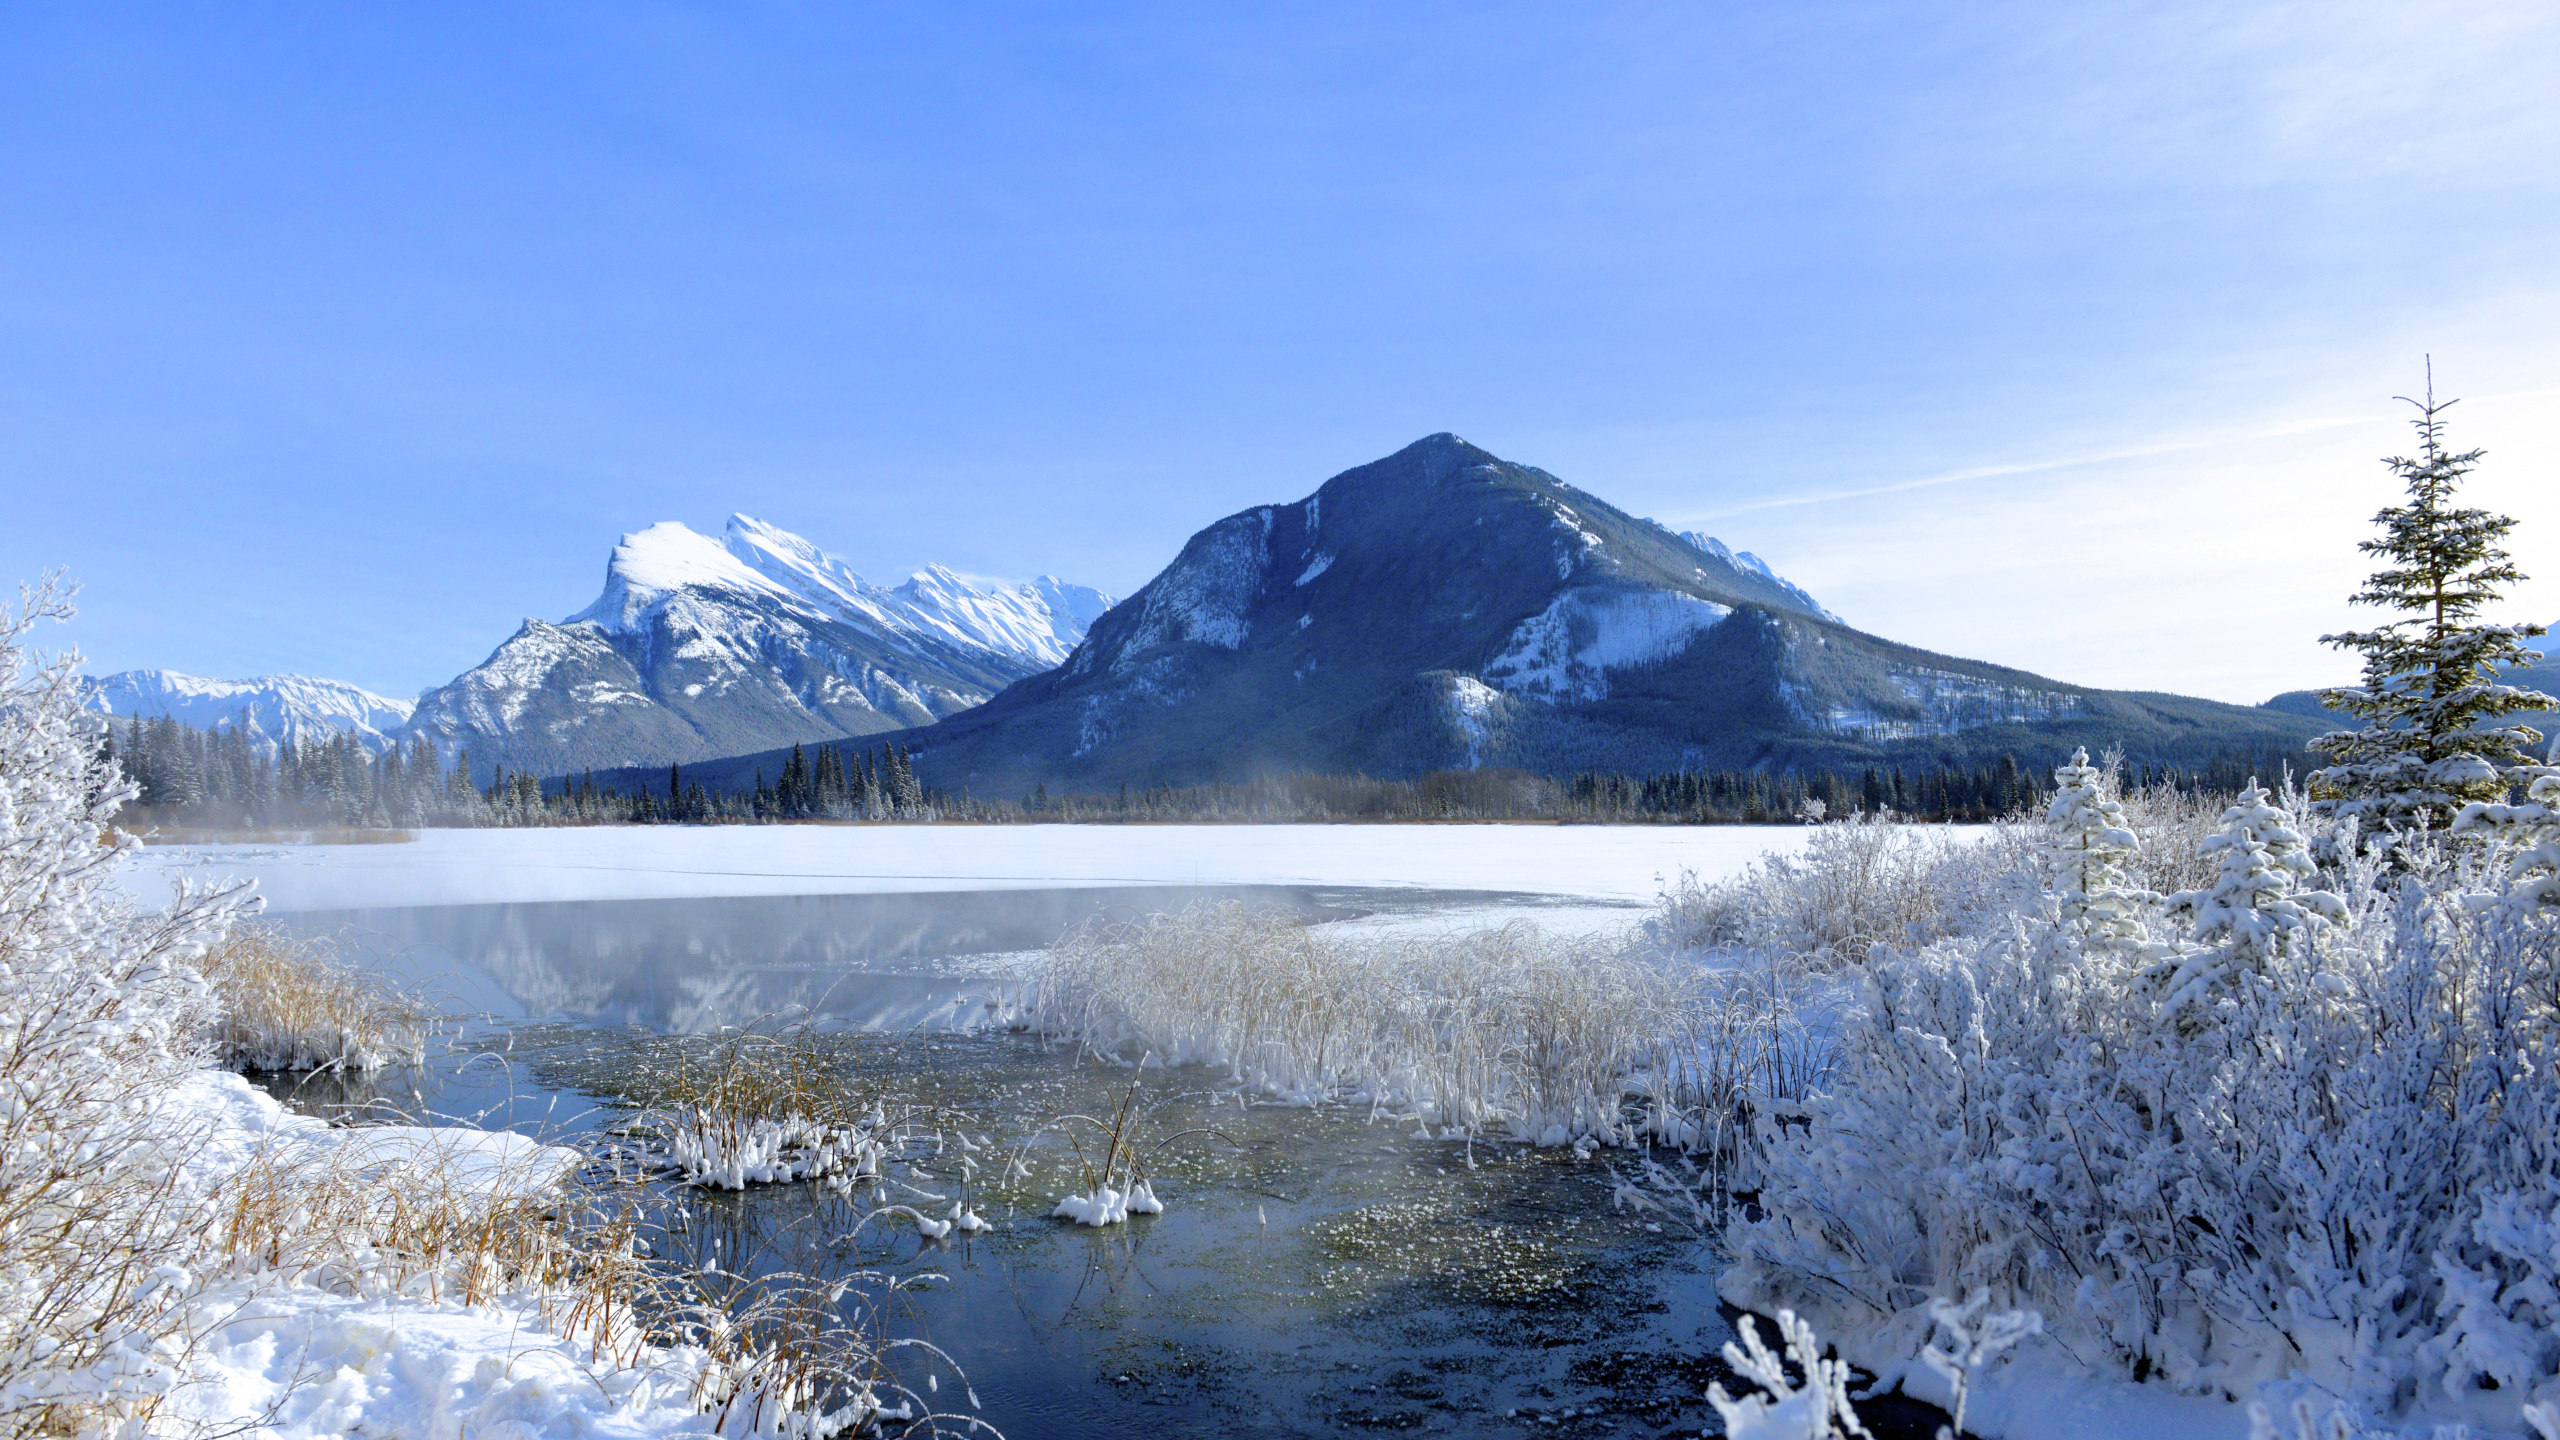 Snow Covered Mountain Near Lake Under Blue Sky During Daytime. Wallpaper in 2560x1440 Resolution